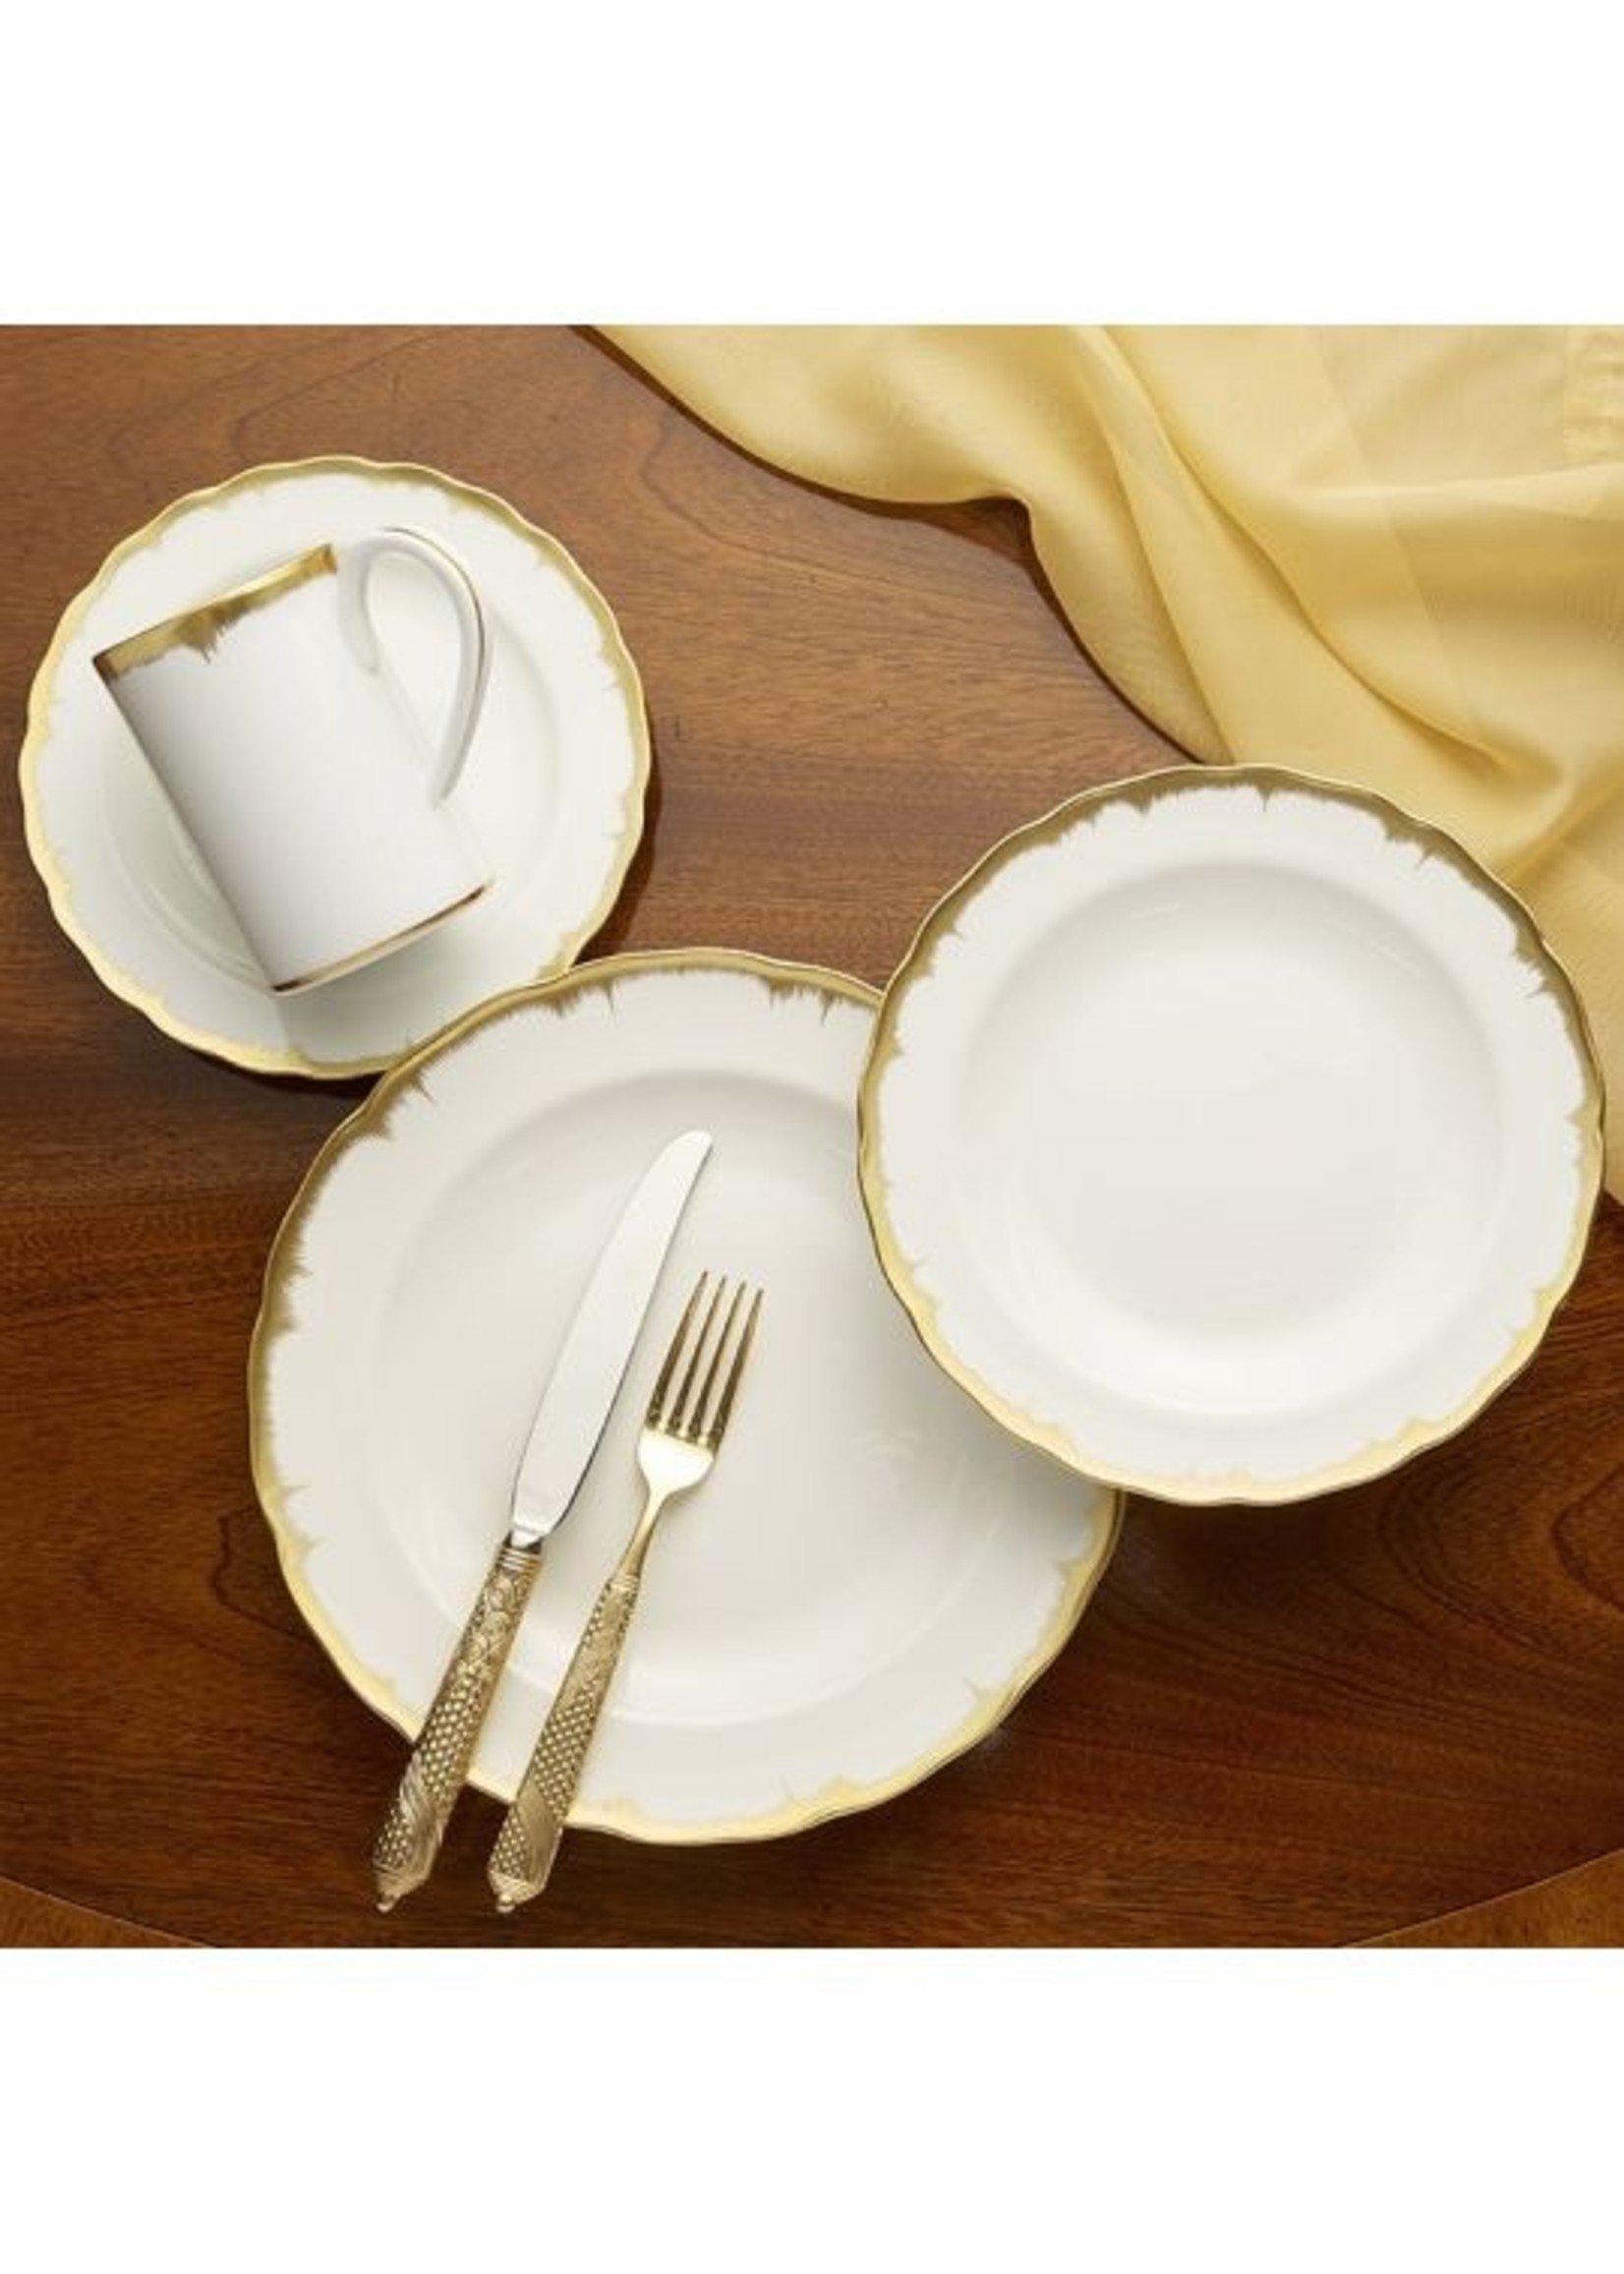 Mottahedeh Mottahedeh Chelsea Feather Gold 4 pc Place Setting